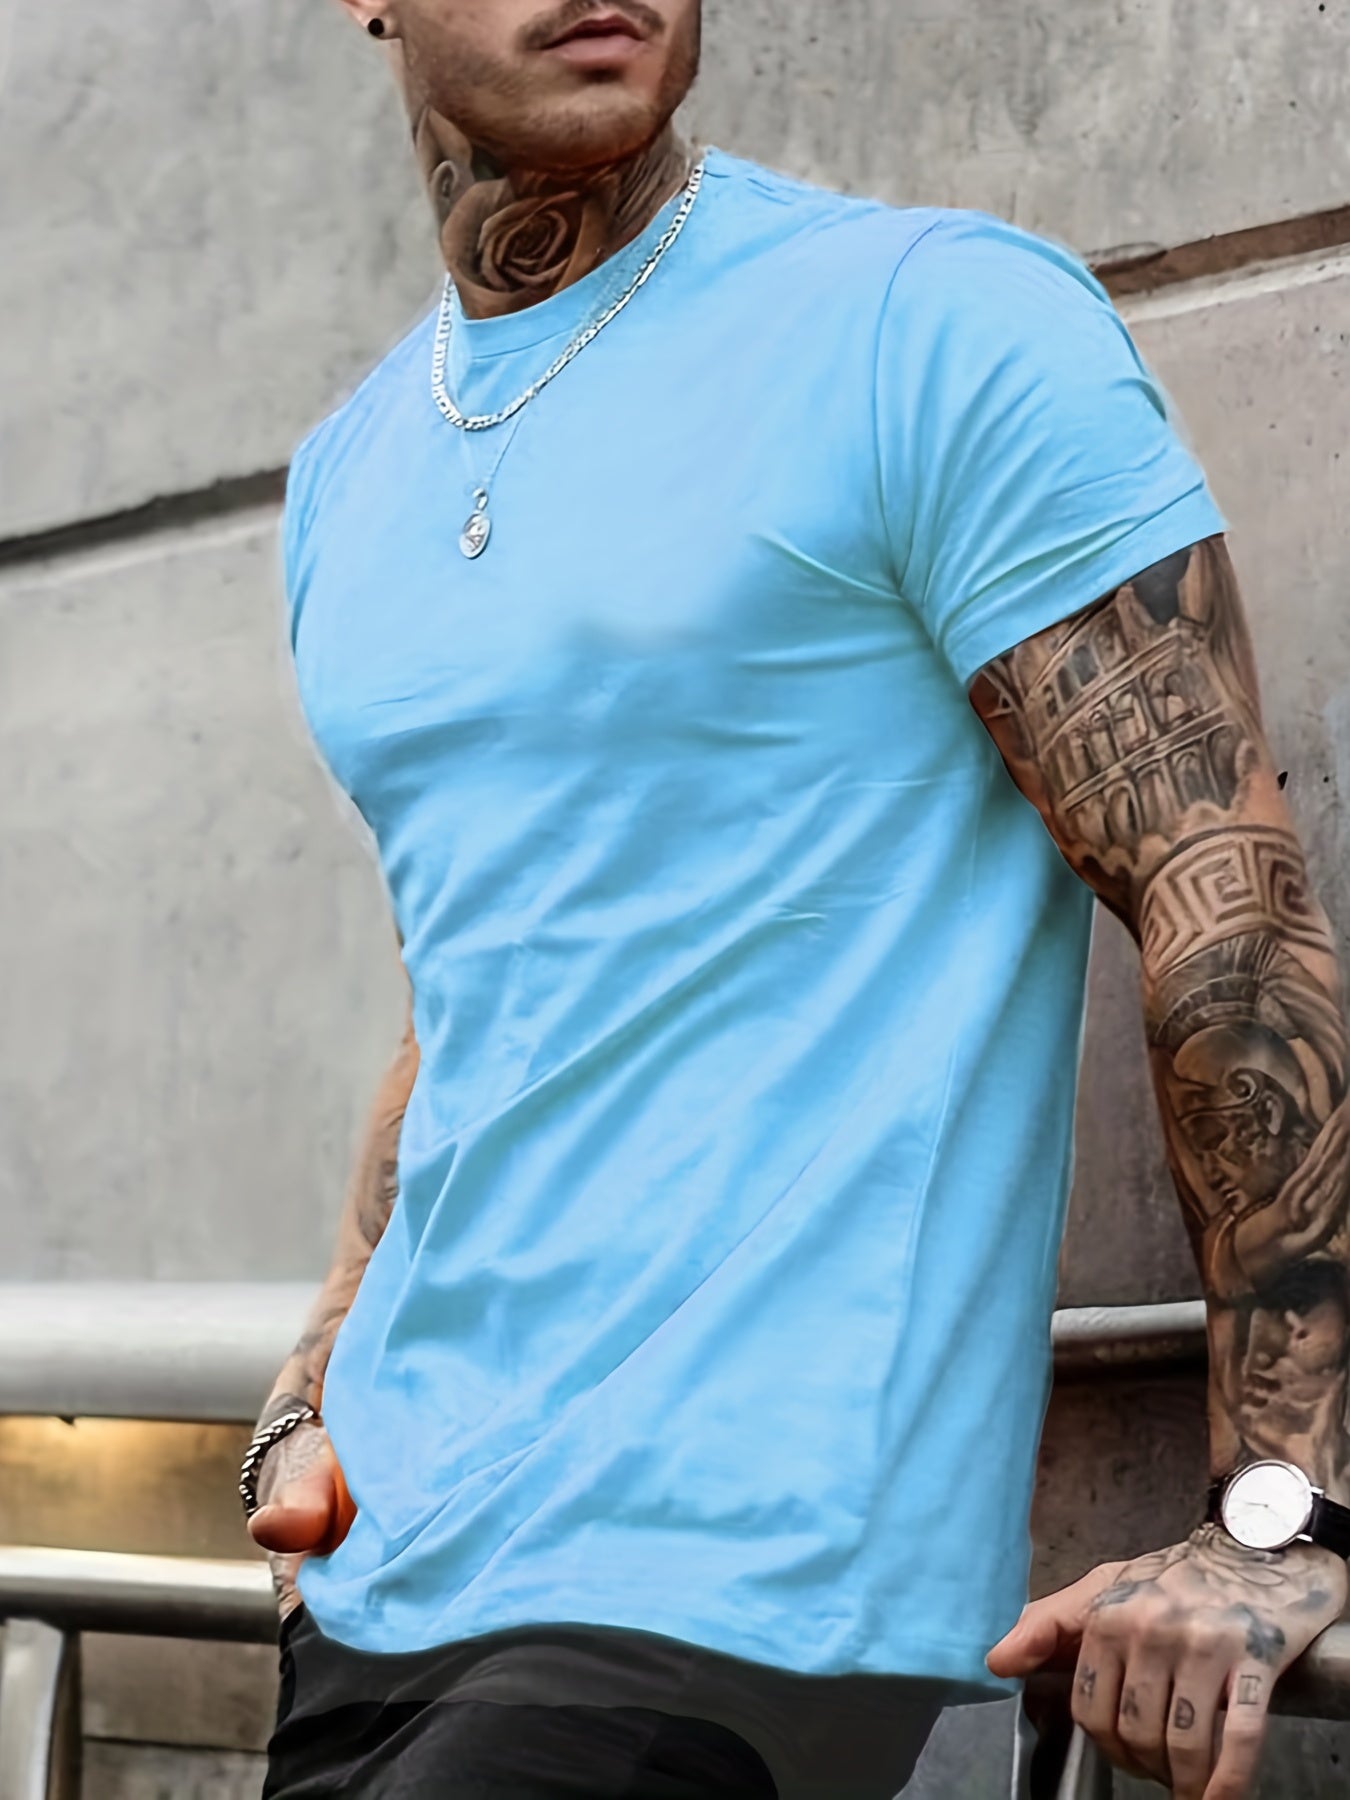 Classic Design Black Solid Top Casual Mid Stretch Short Sleeve Crew Neck Graphic T-shirt, Men's Tee For Summer Outdoor